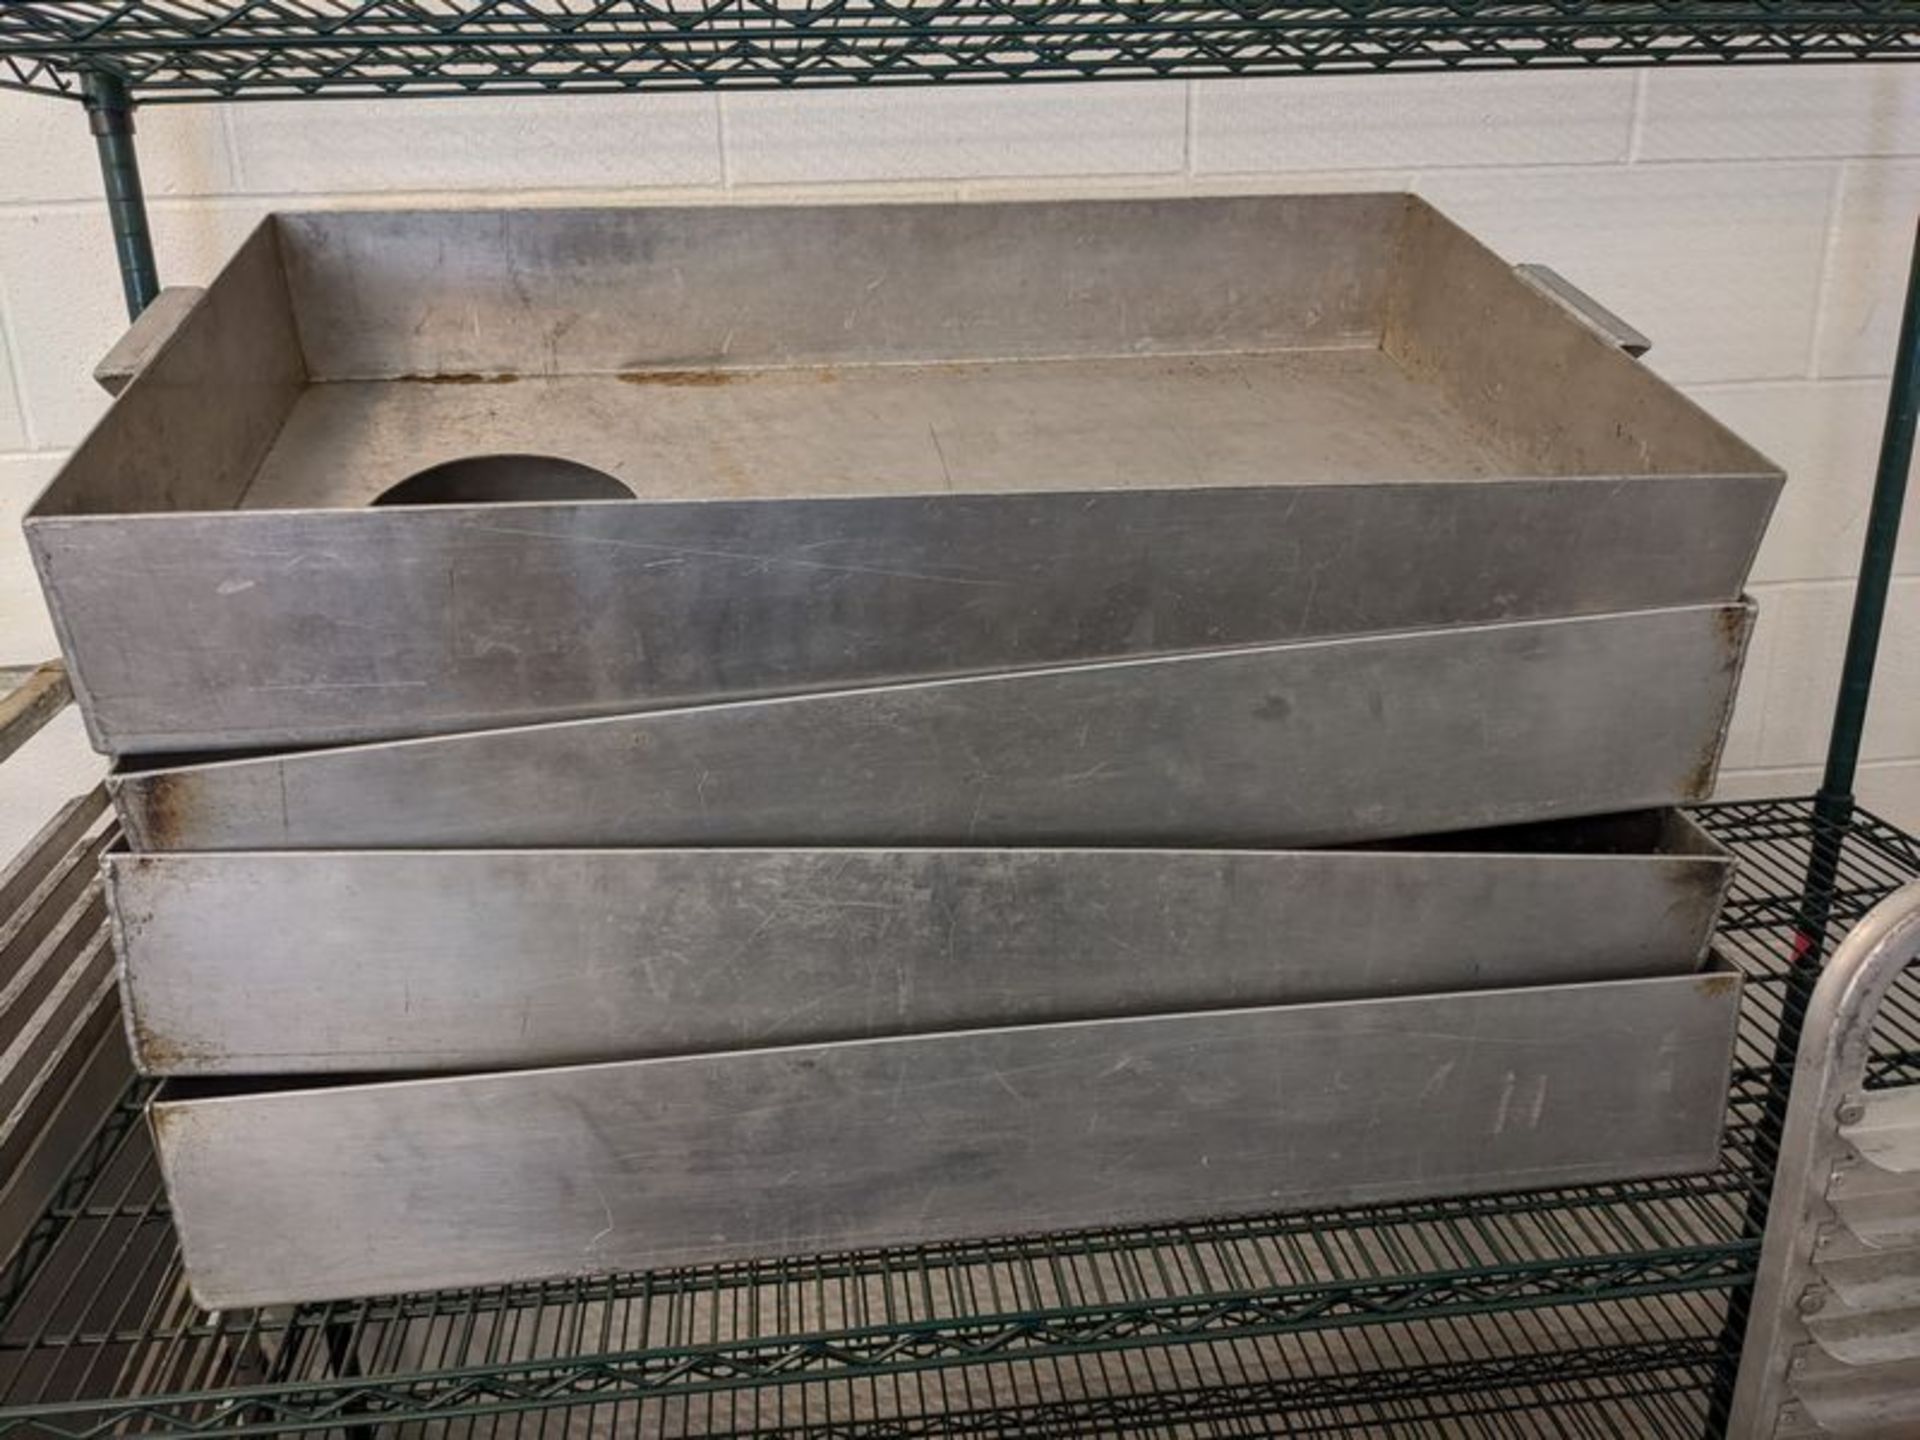 Four 36 x 21 Aluminum Trays - Note one has a drain hole